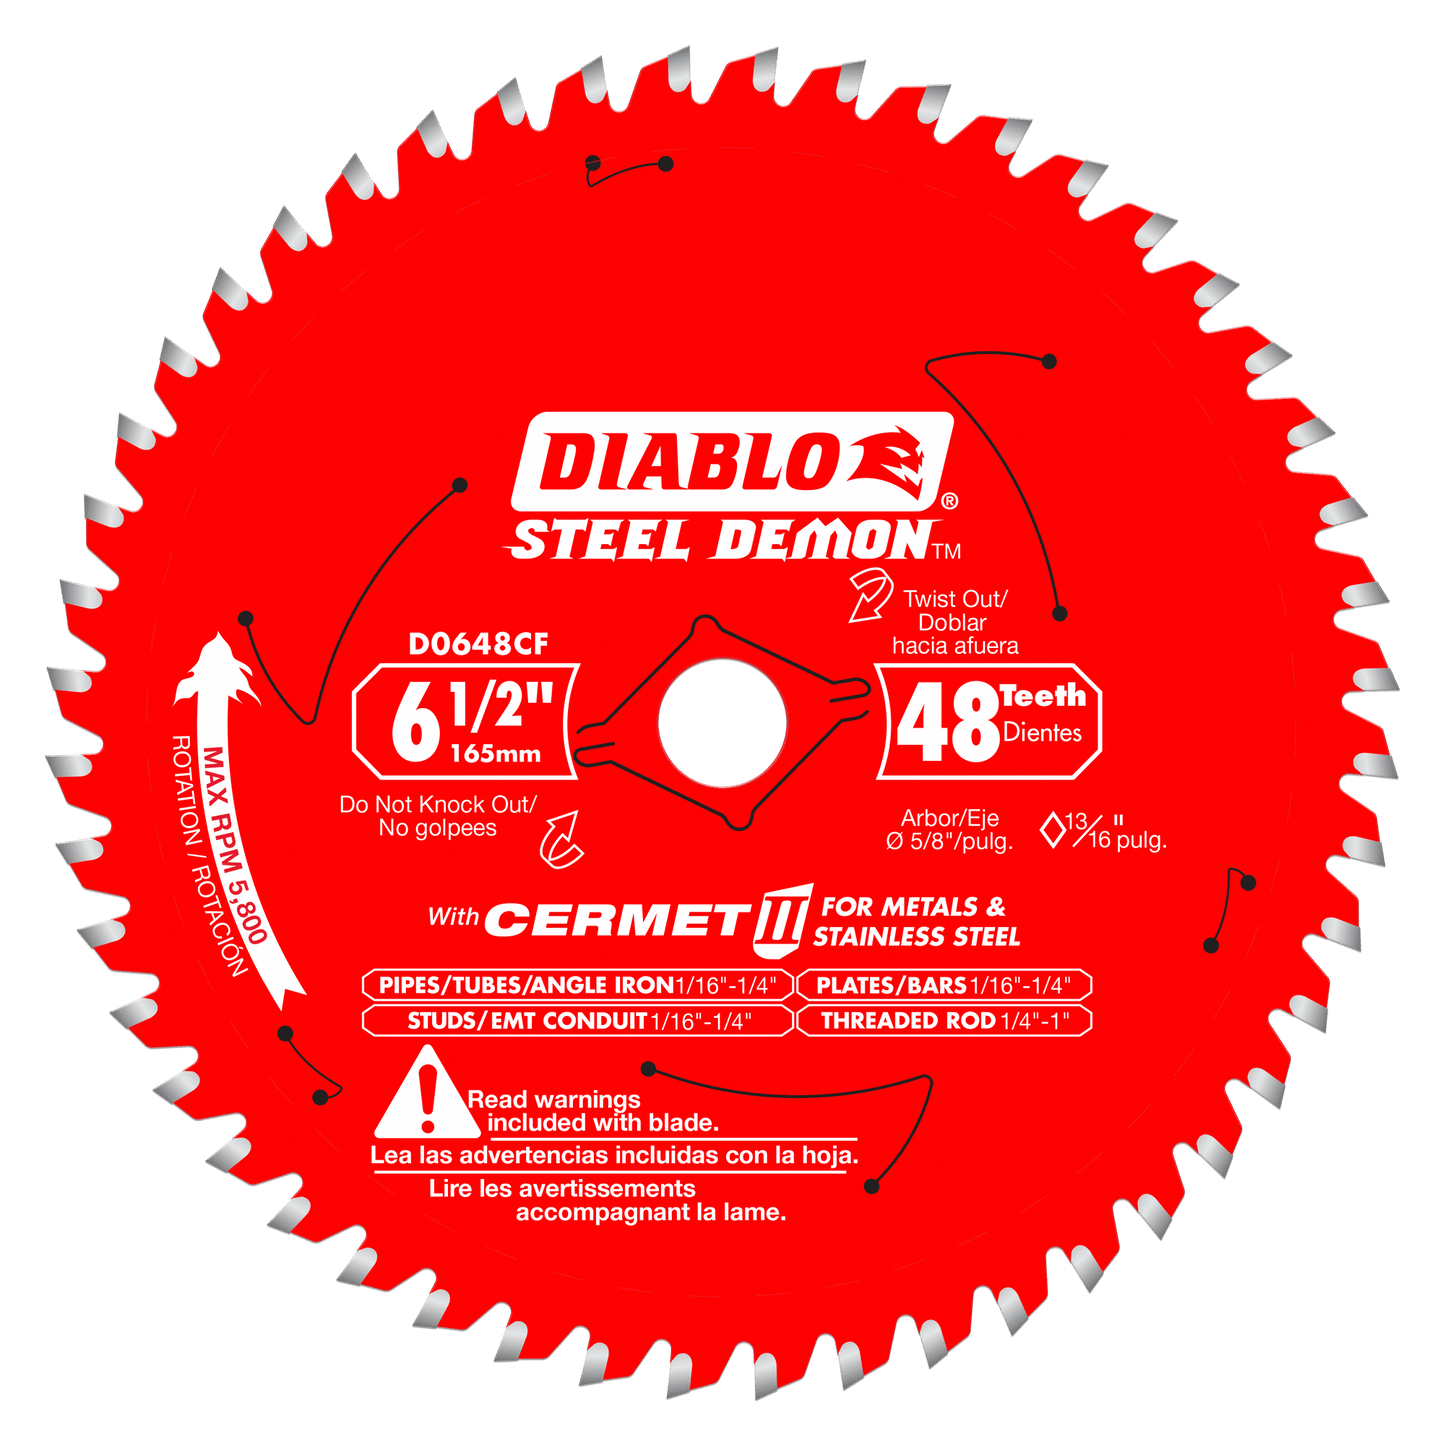 D0648CFX - 6-1/2" x 48 Tooth Steel Demon Cermet II Saw Blade for Metals and Stainless Steel